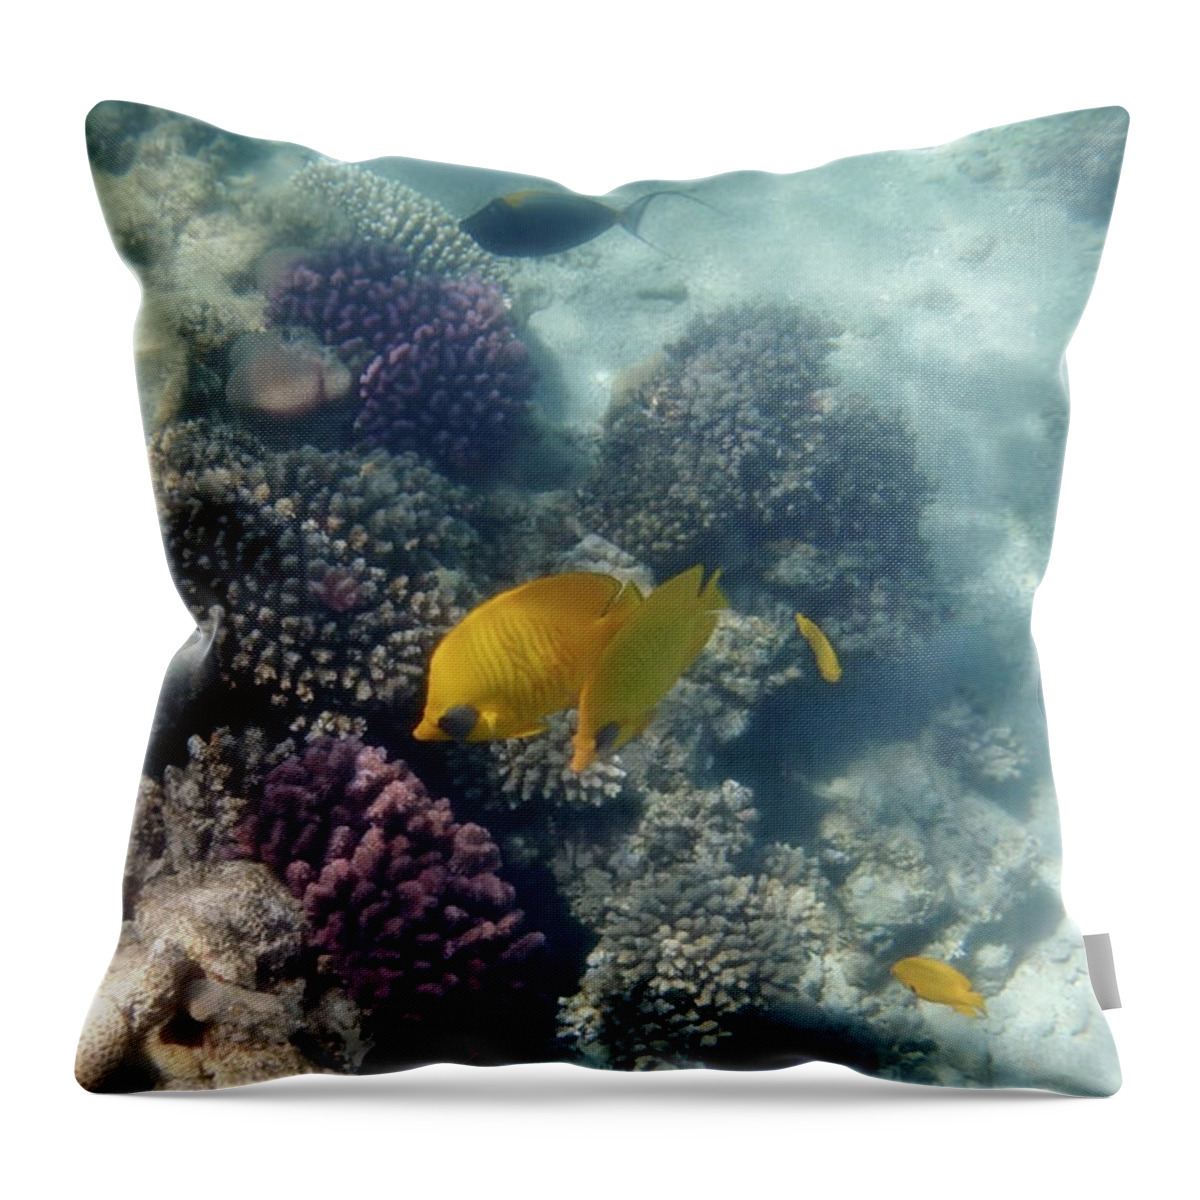 Underwater Throw Pillow featuring the photograph Amazing Beautiful And Fantastic Red Sea by Johanna Hurmerinta